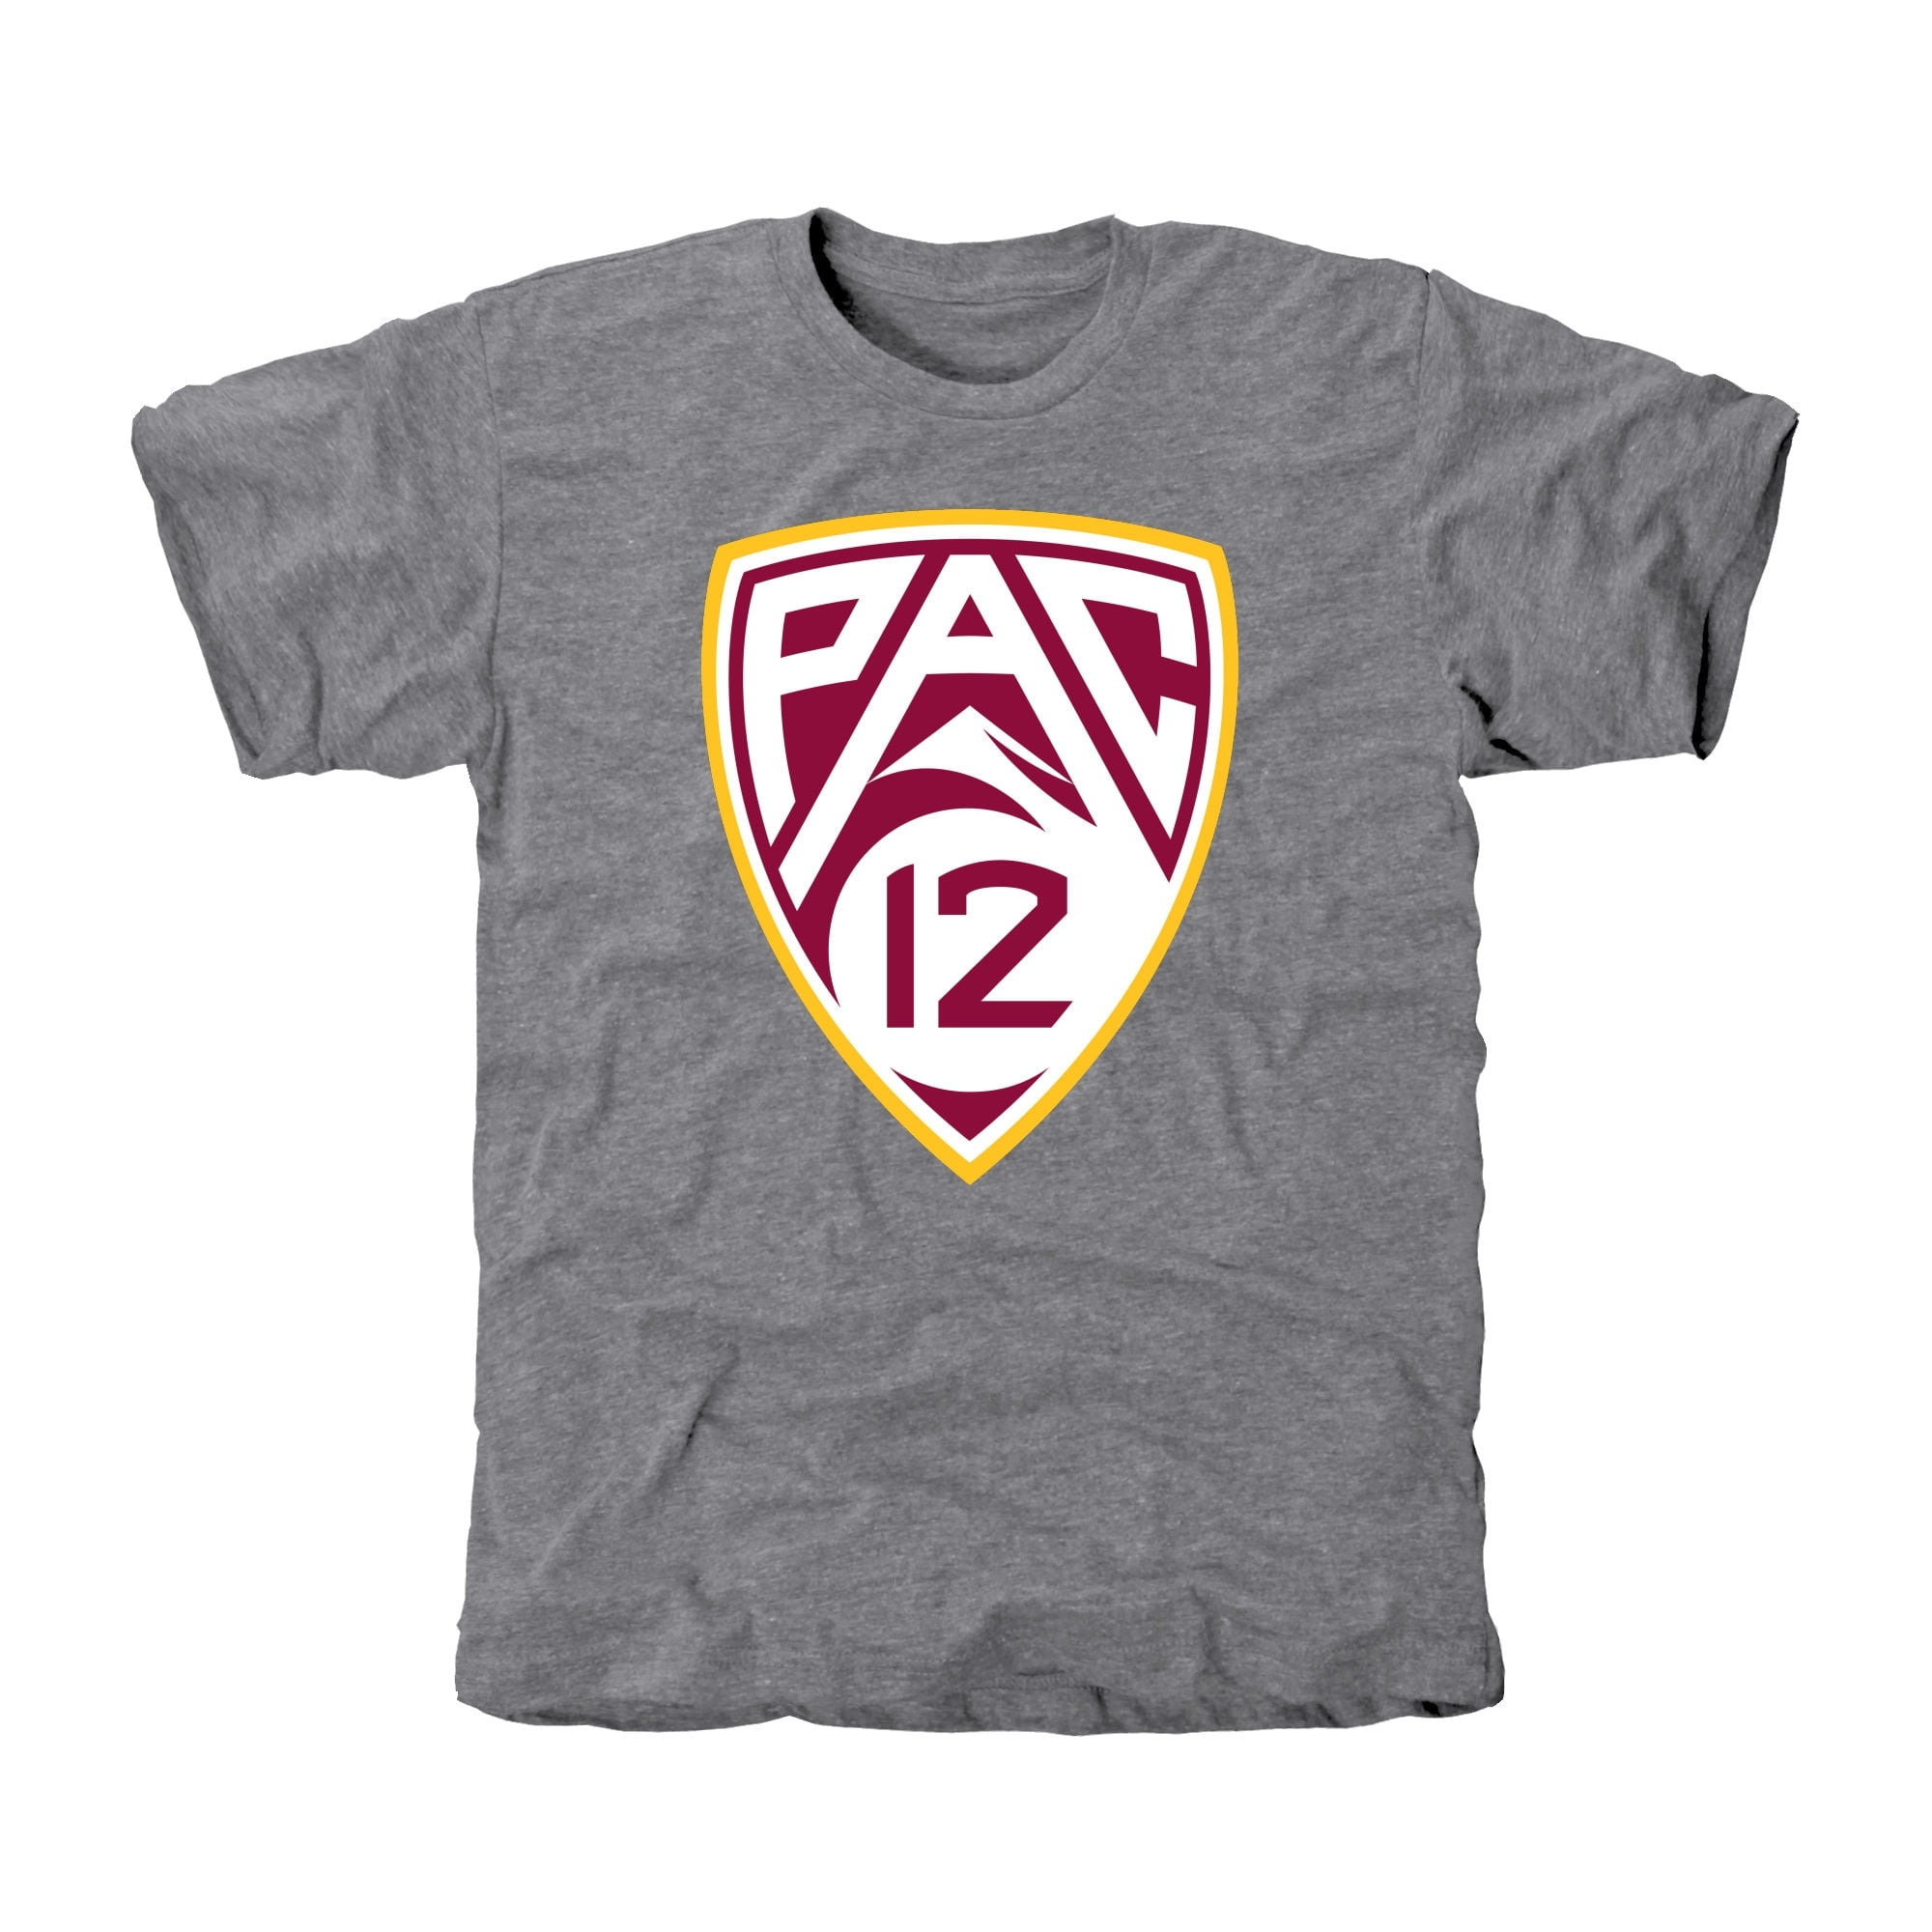 NCAA Arizona State Sun Devils Boys Outerstuff Game Time Basic Tee 10-12 Team Color Youth Medium 